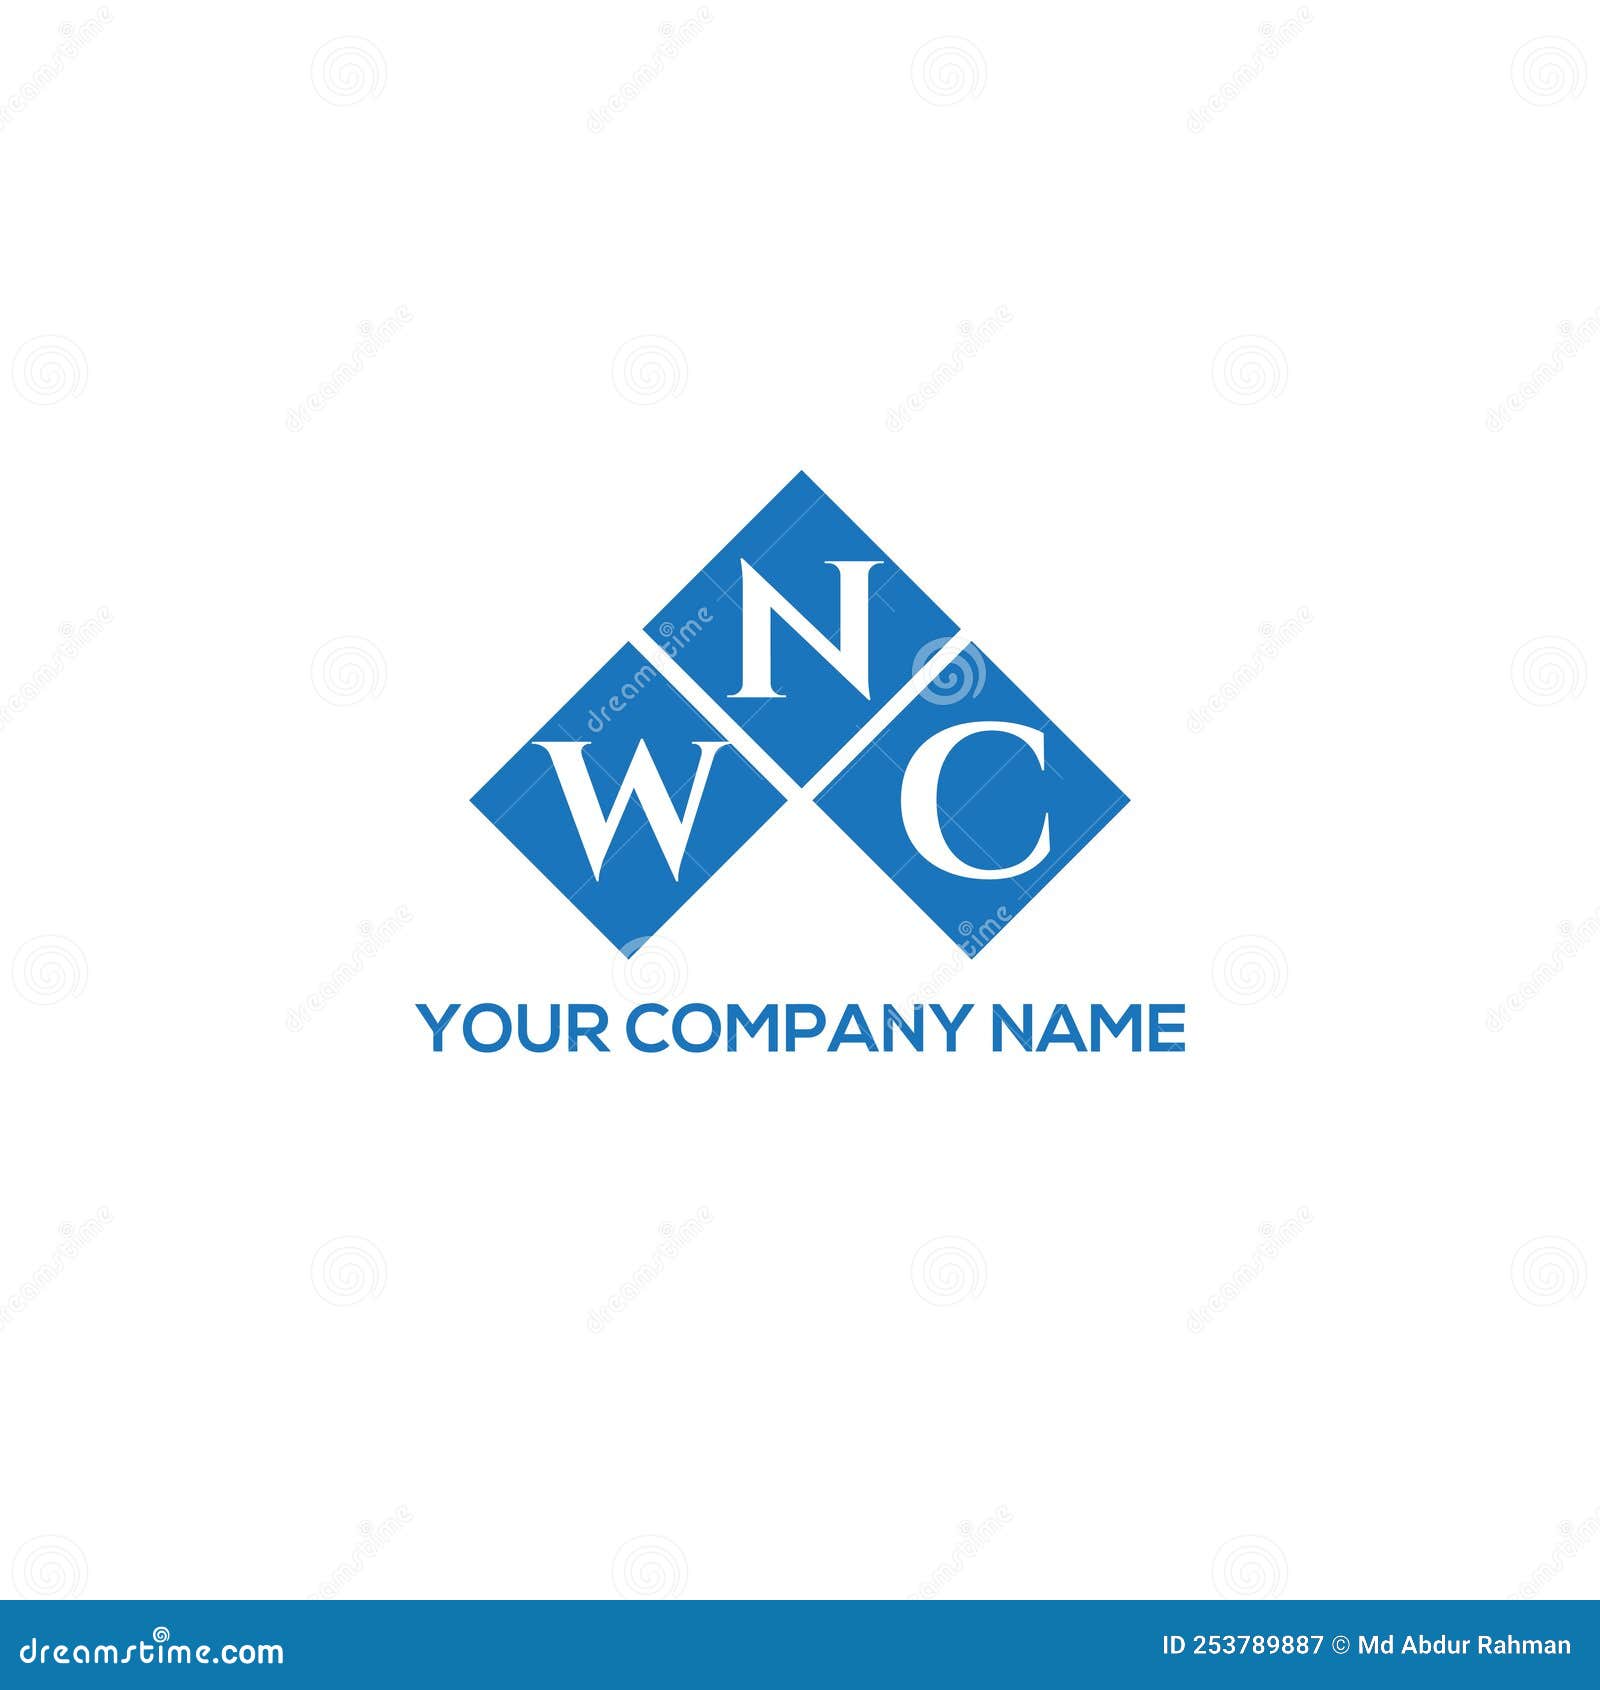 wnc letter logo  on white background. wnc creative initials letter logo concept.